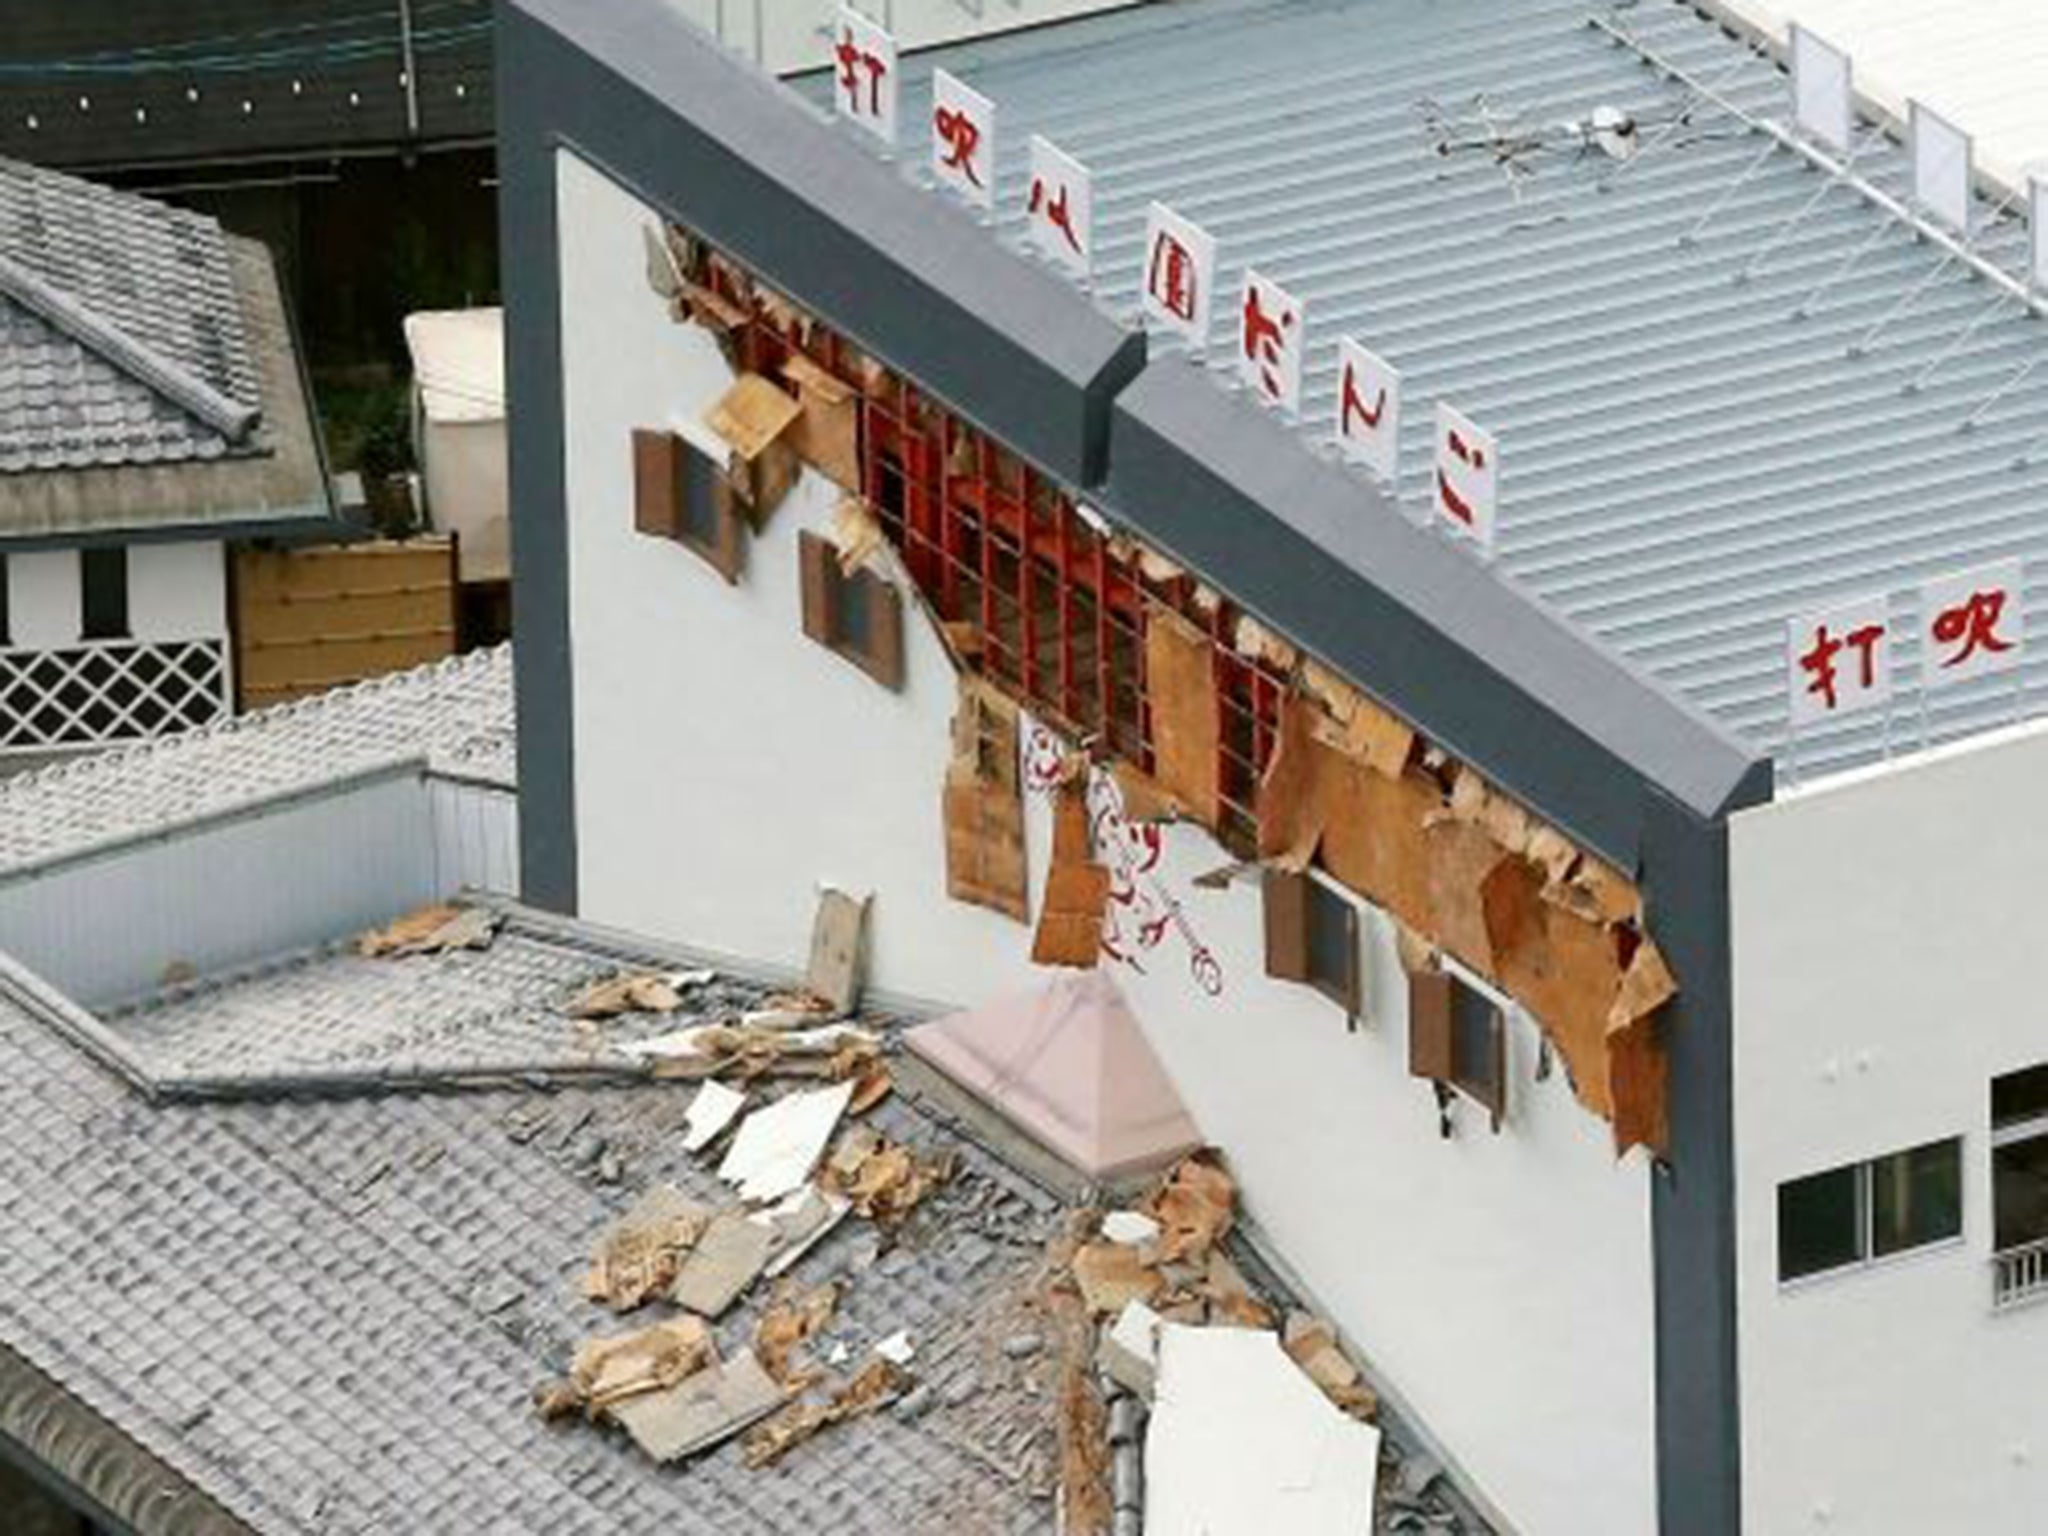 Debris fallen from the damaged wall of a building scattered on a rooftop in Kurayoshi, Tottori prefecture